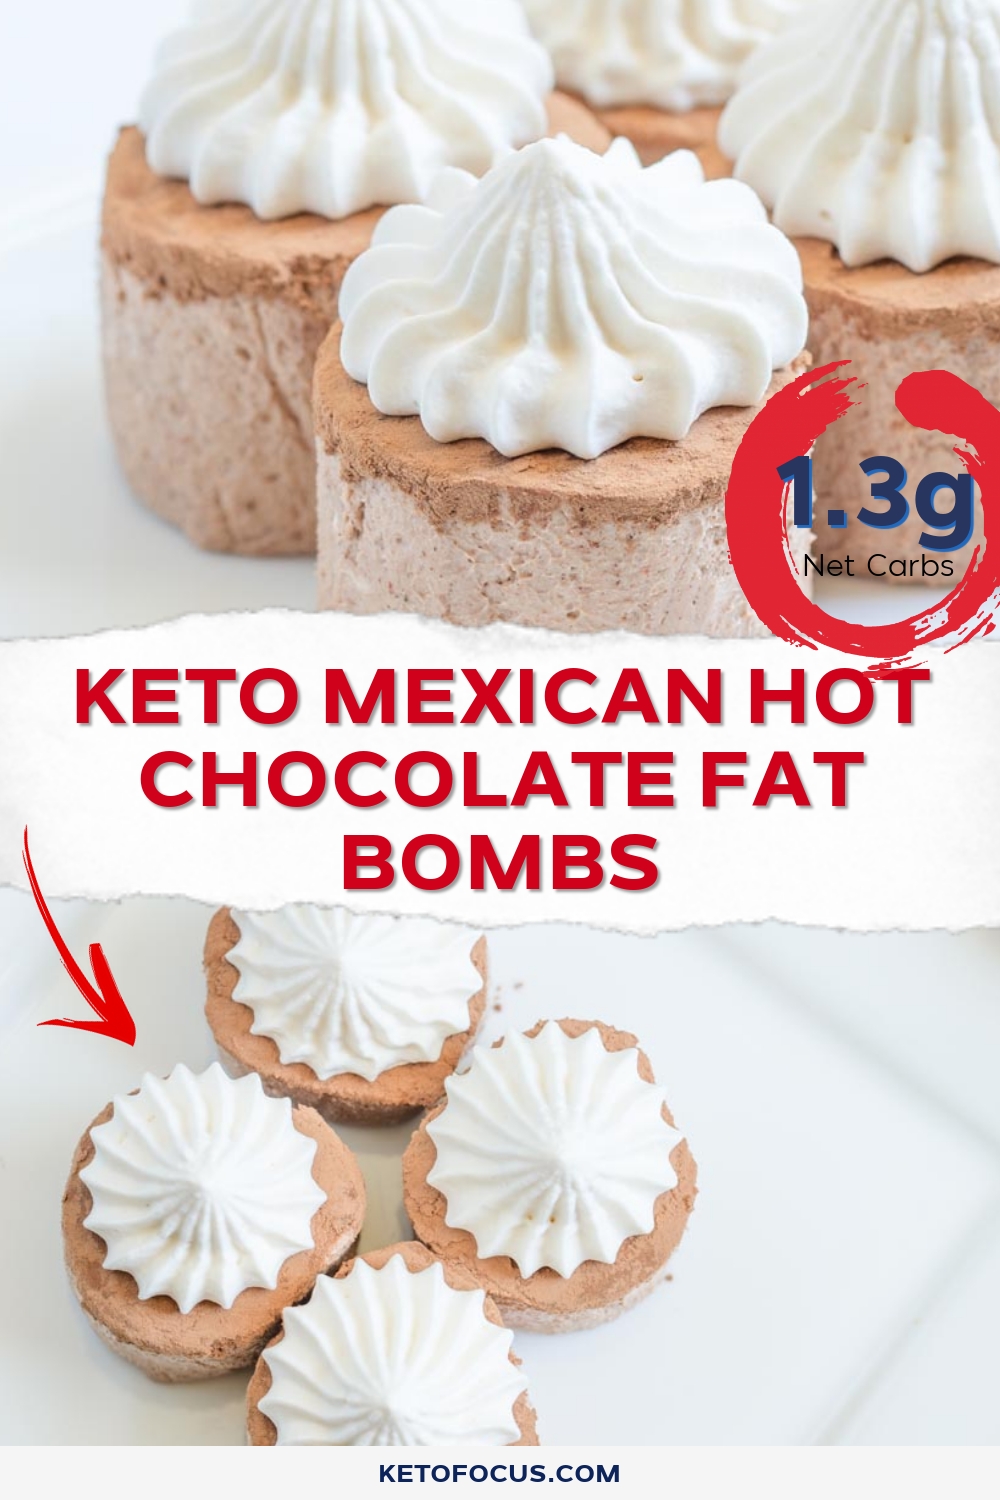 Keto Mexican Hot Chocolate Fat Bombs